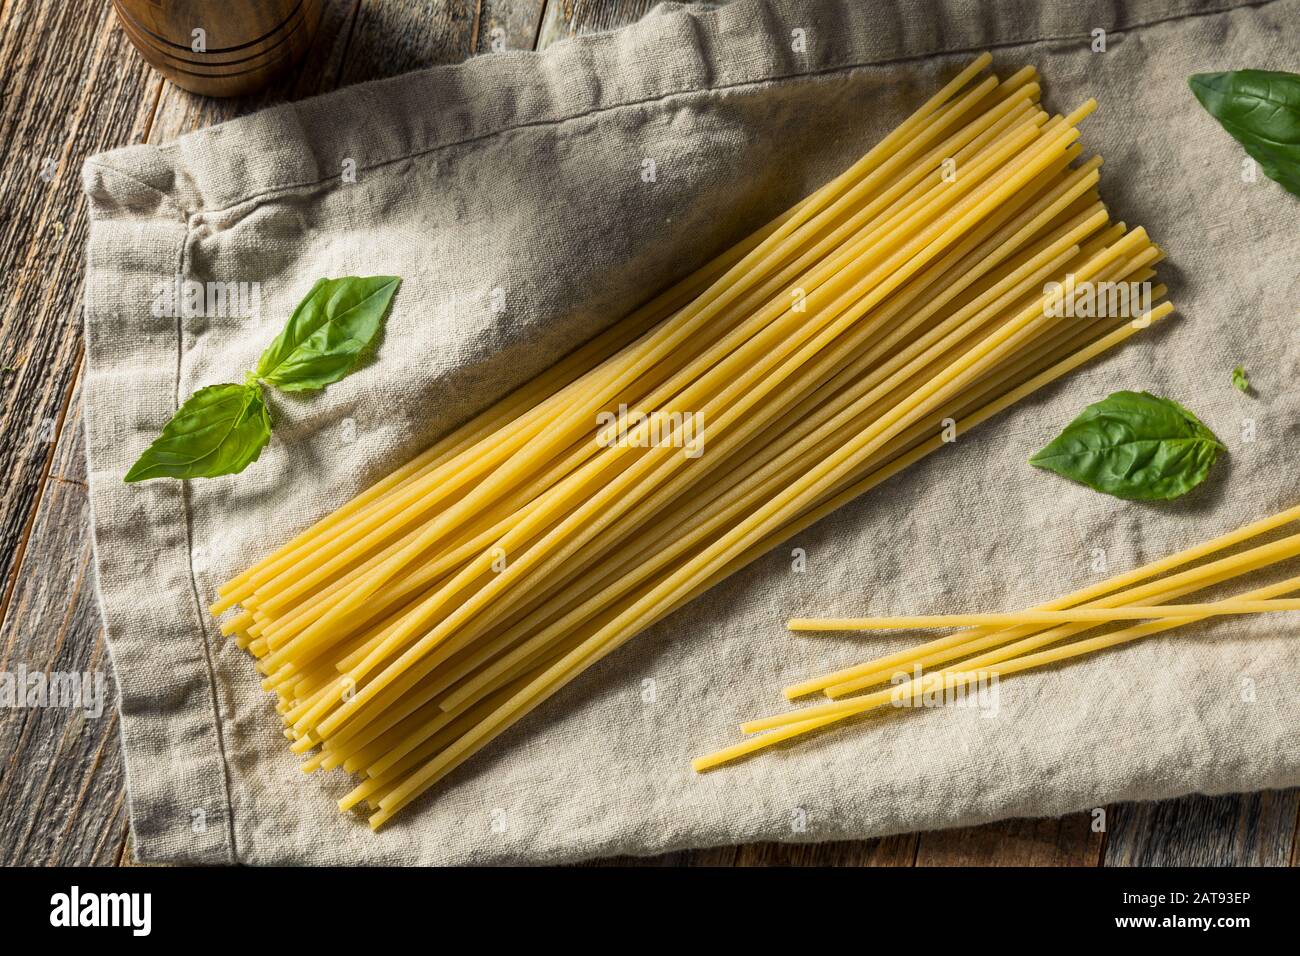 https://c8.alamy.com/comp/2AT93EP/raw-organic-bucatini-pasta-in-a-bunch-2AT93EP.jpg